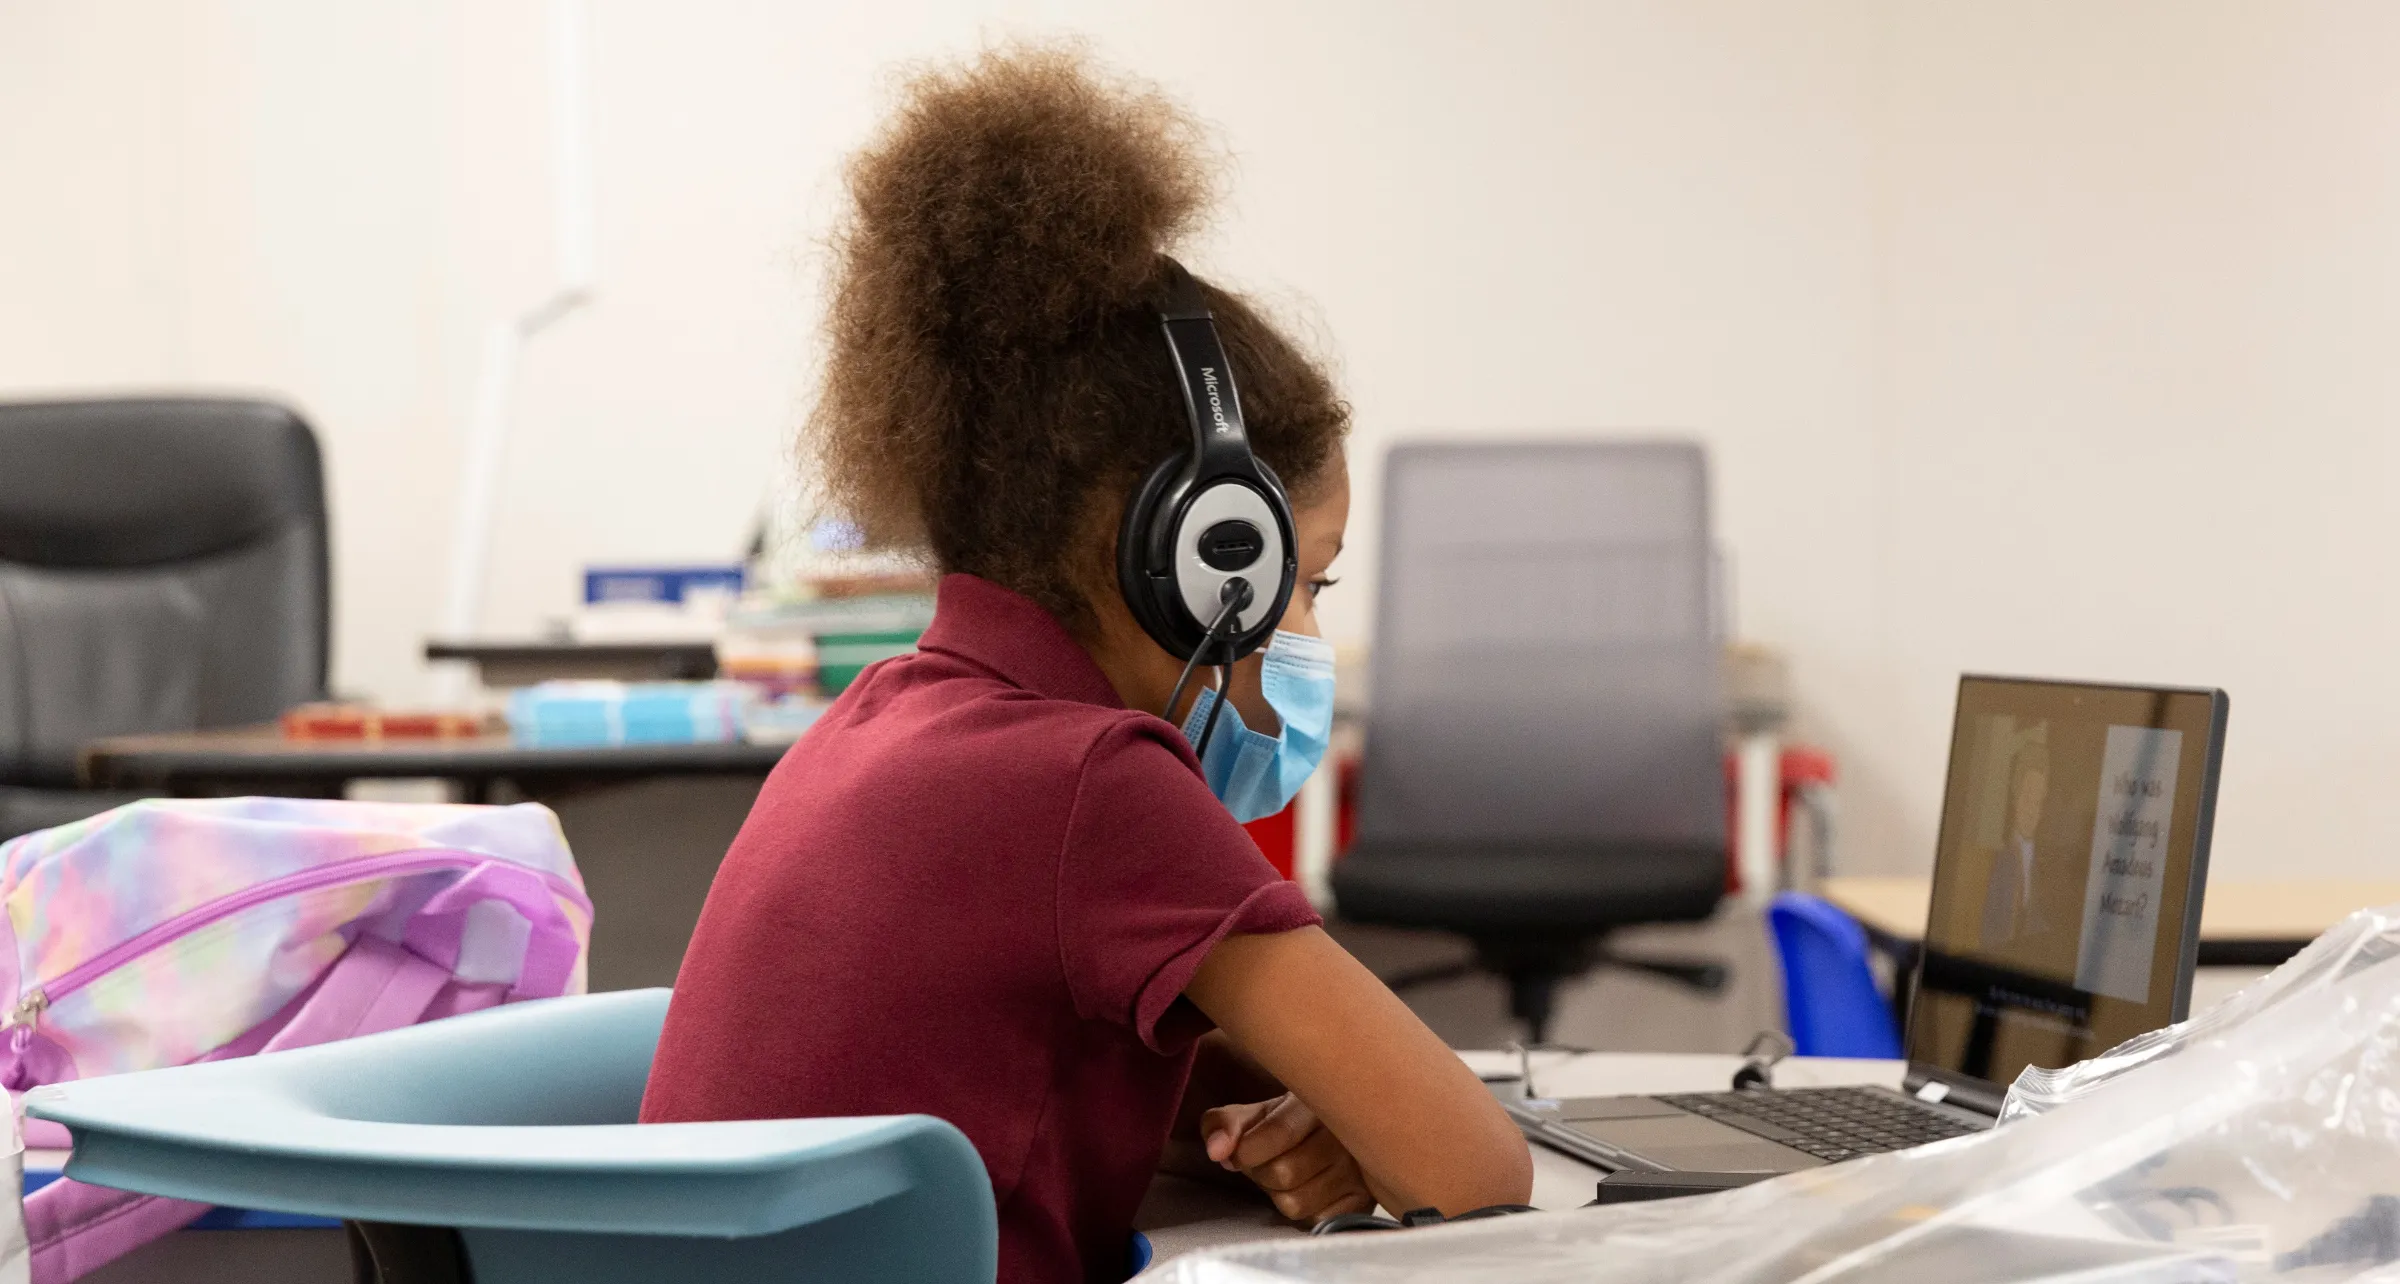 A student attends a virtual class while monitored by instructional assistants as in-person learning resumes with restrictions in place to prevent the spread of coronavirus disease (COVID-19) at Wilson Primary School in Phoenix, Arizona, U.S., August 17, 2020